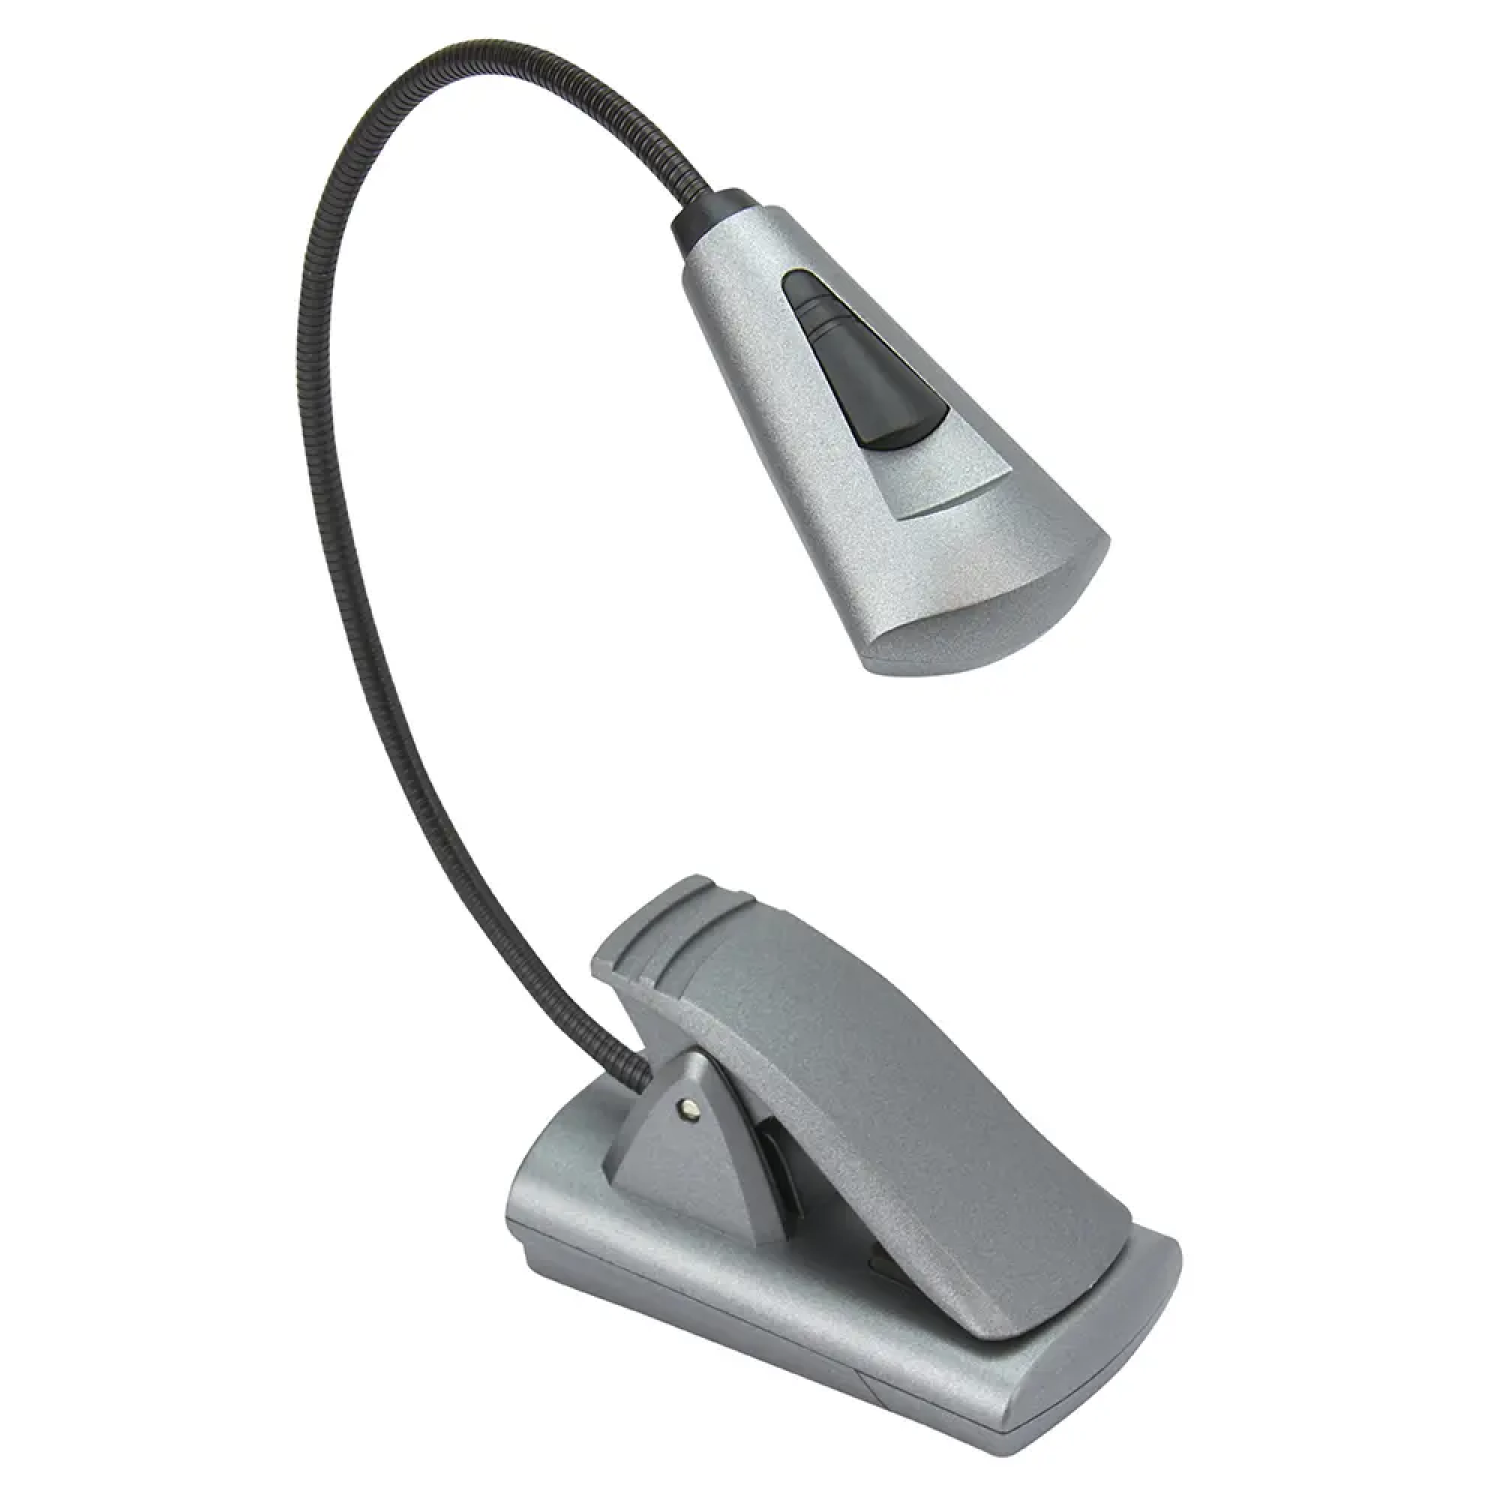 Image of the FlexNeck Plus Ultra-Bright 6 LED Book Light.